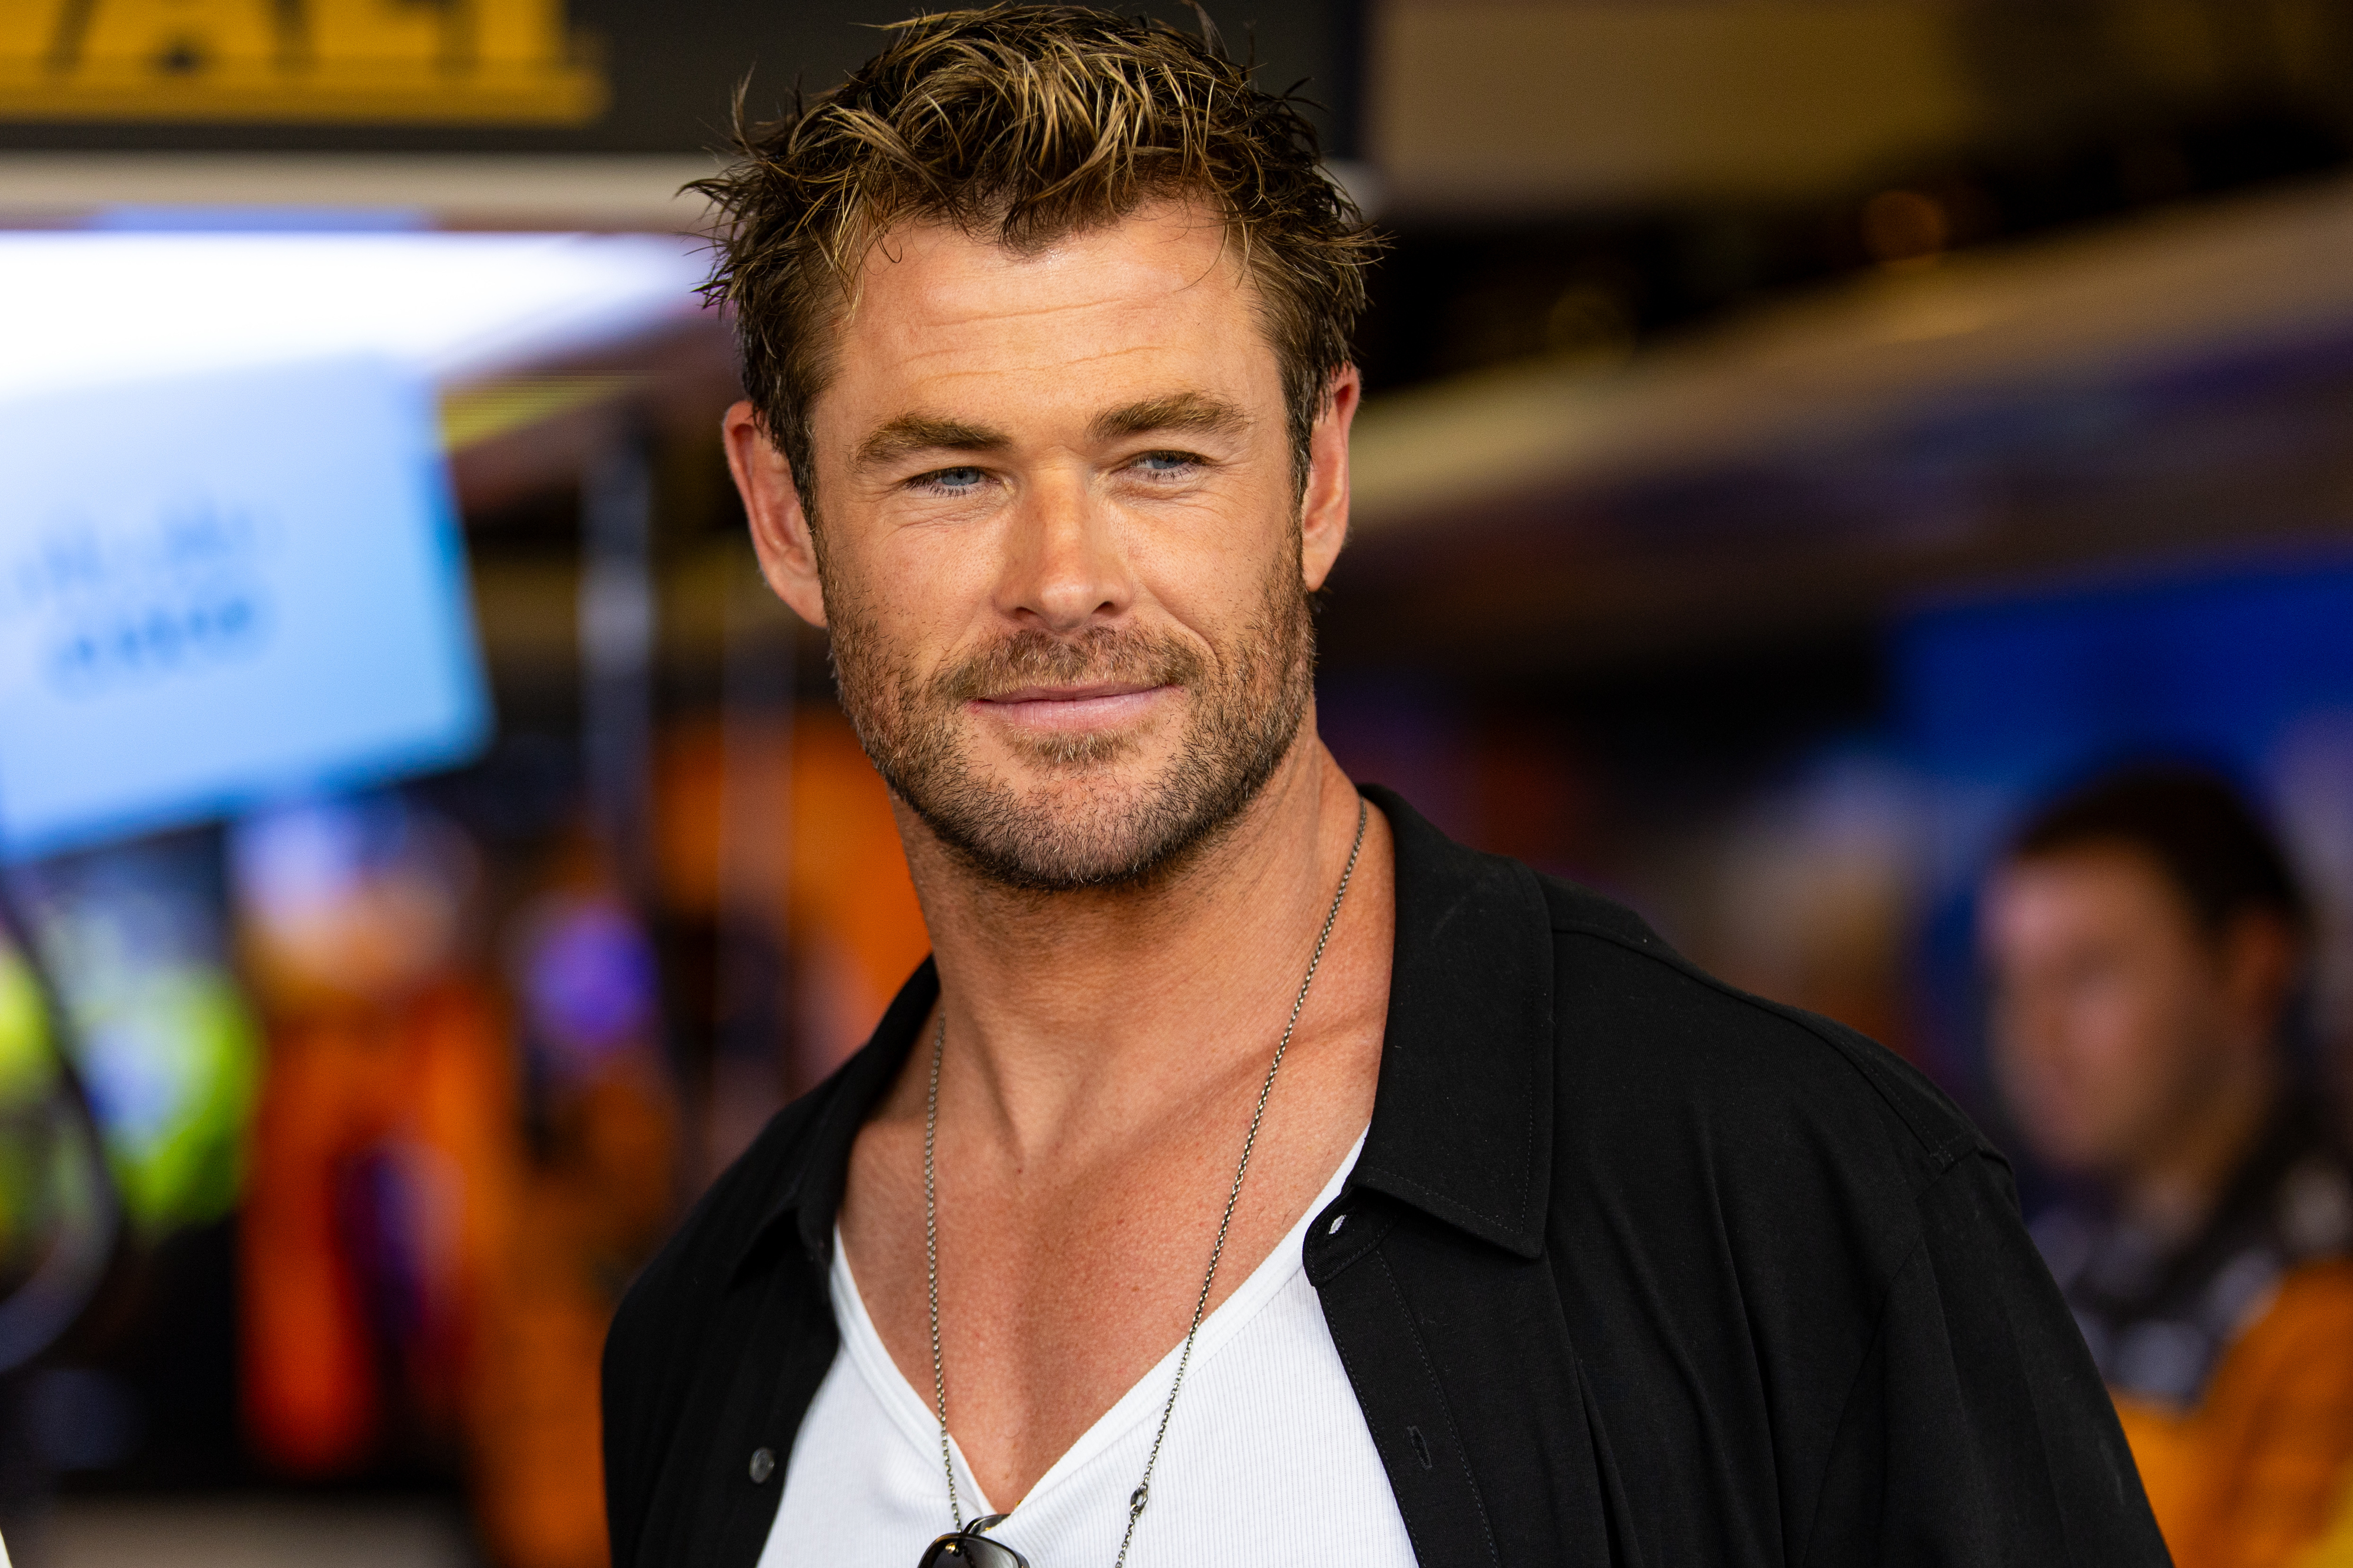 Chris Hemsworth wearing a casual black shirt, smiling at a public event